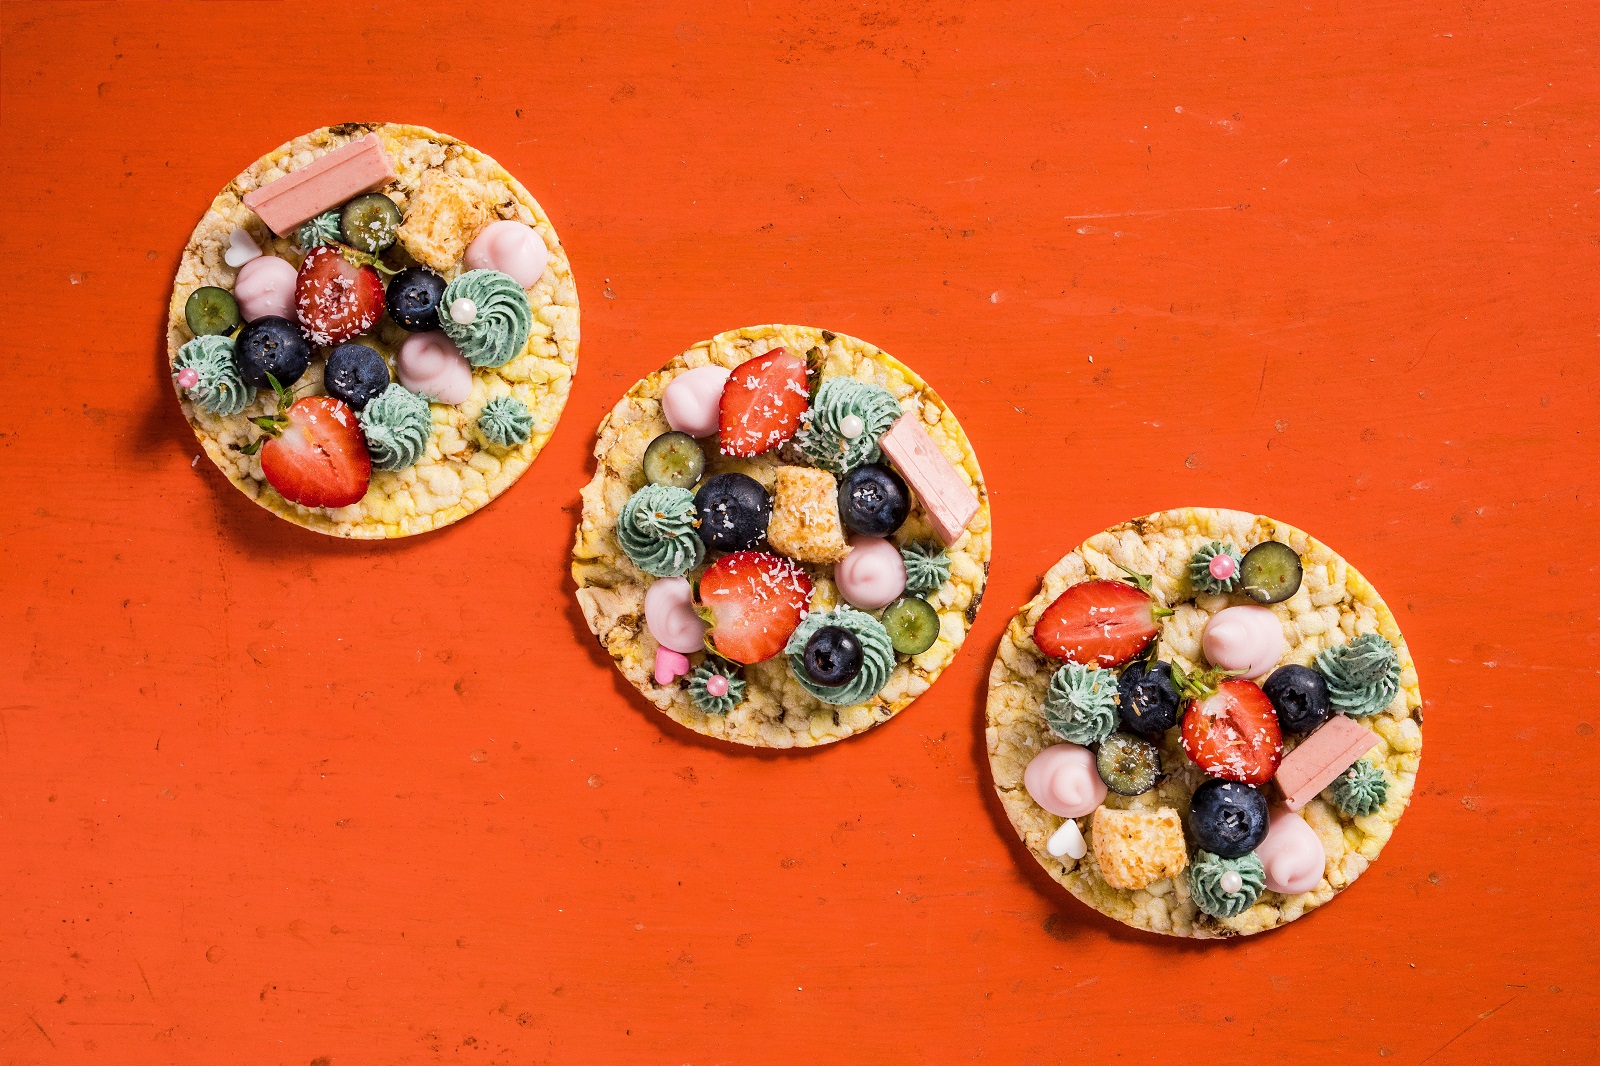 CORN THINS slices with Creamed Cheese, Strawberries, Blueberries & Yoghurt drops